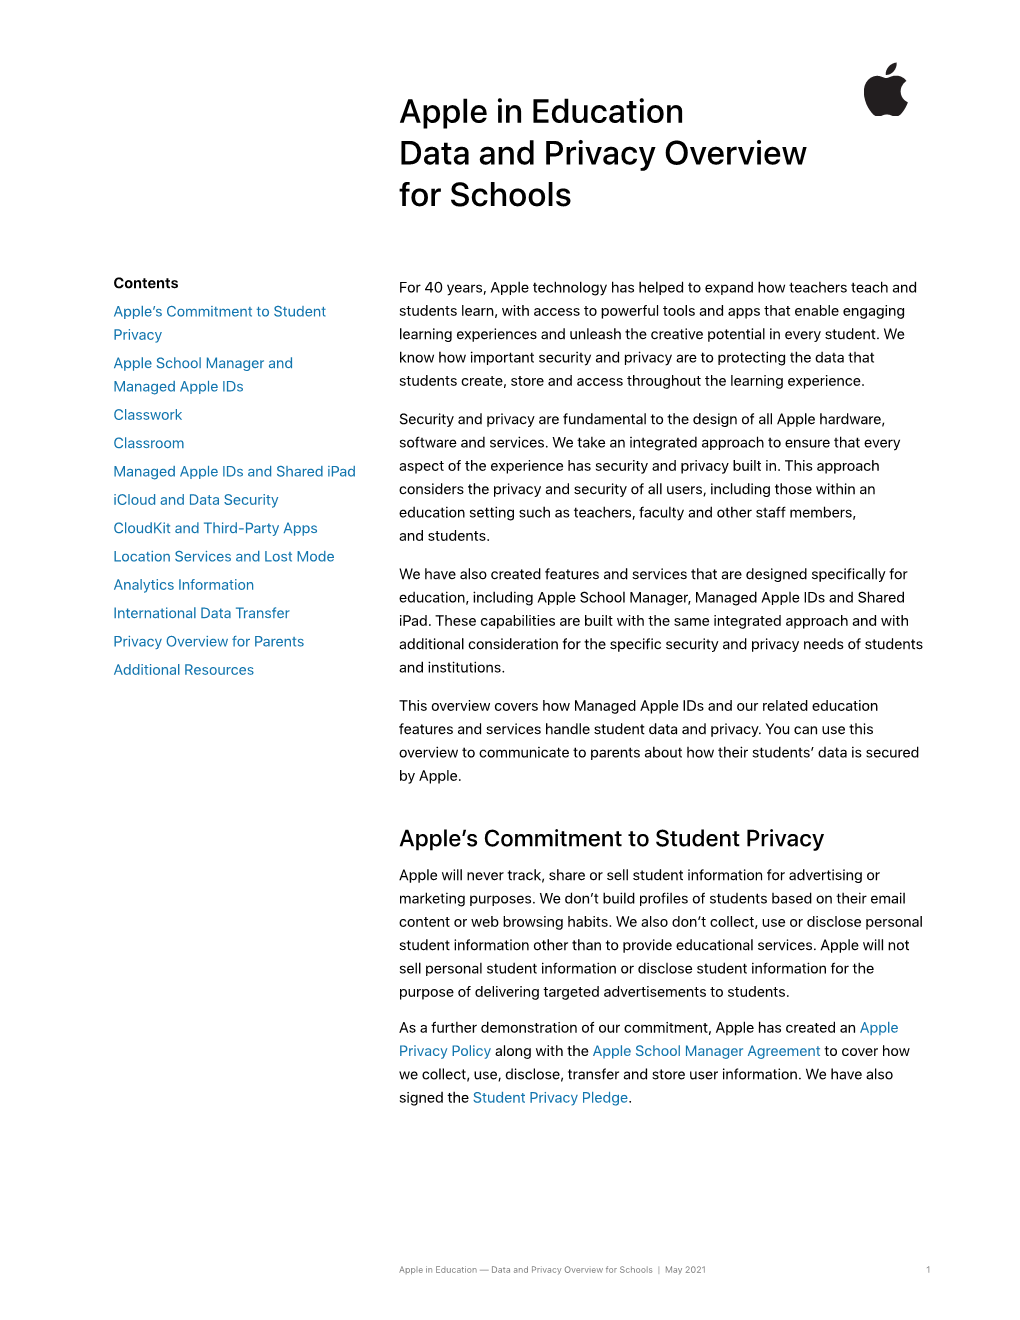 Apple in Education Data and Privacy Overview for Schools